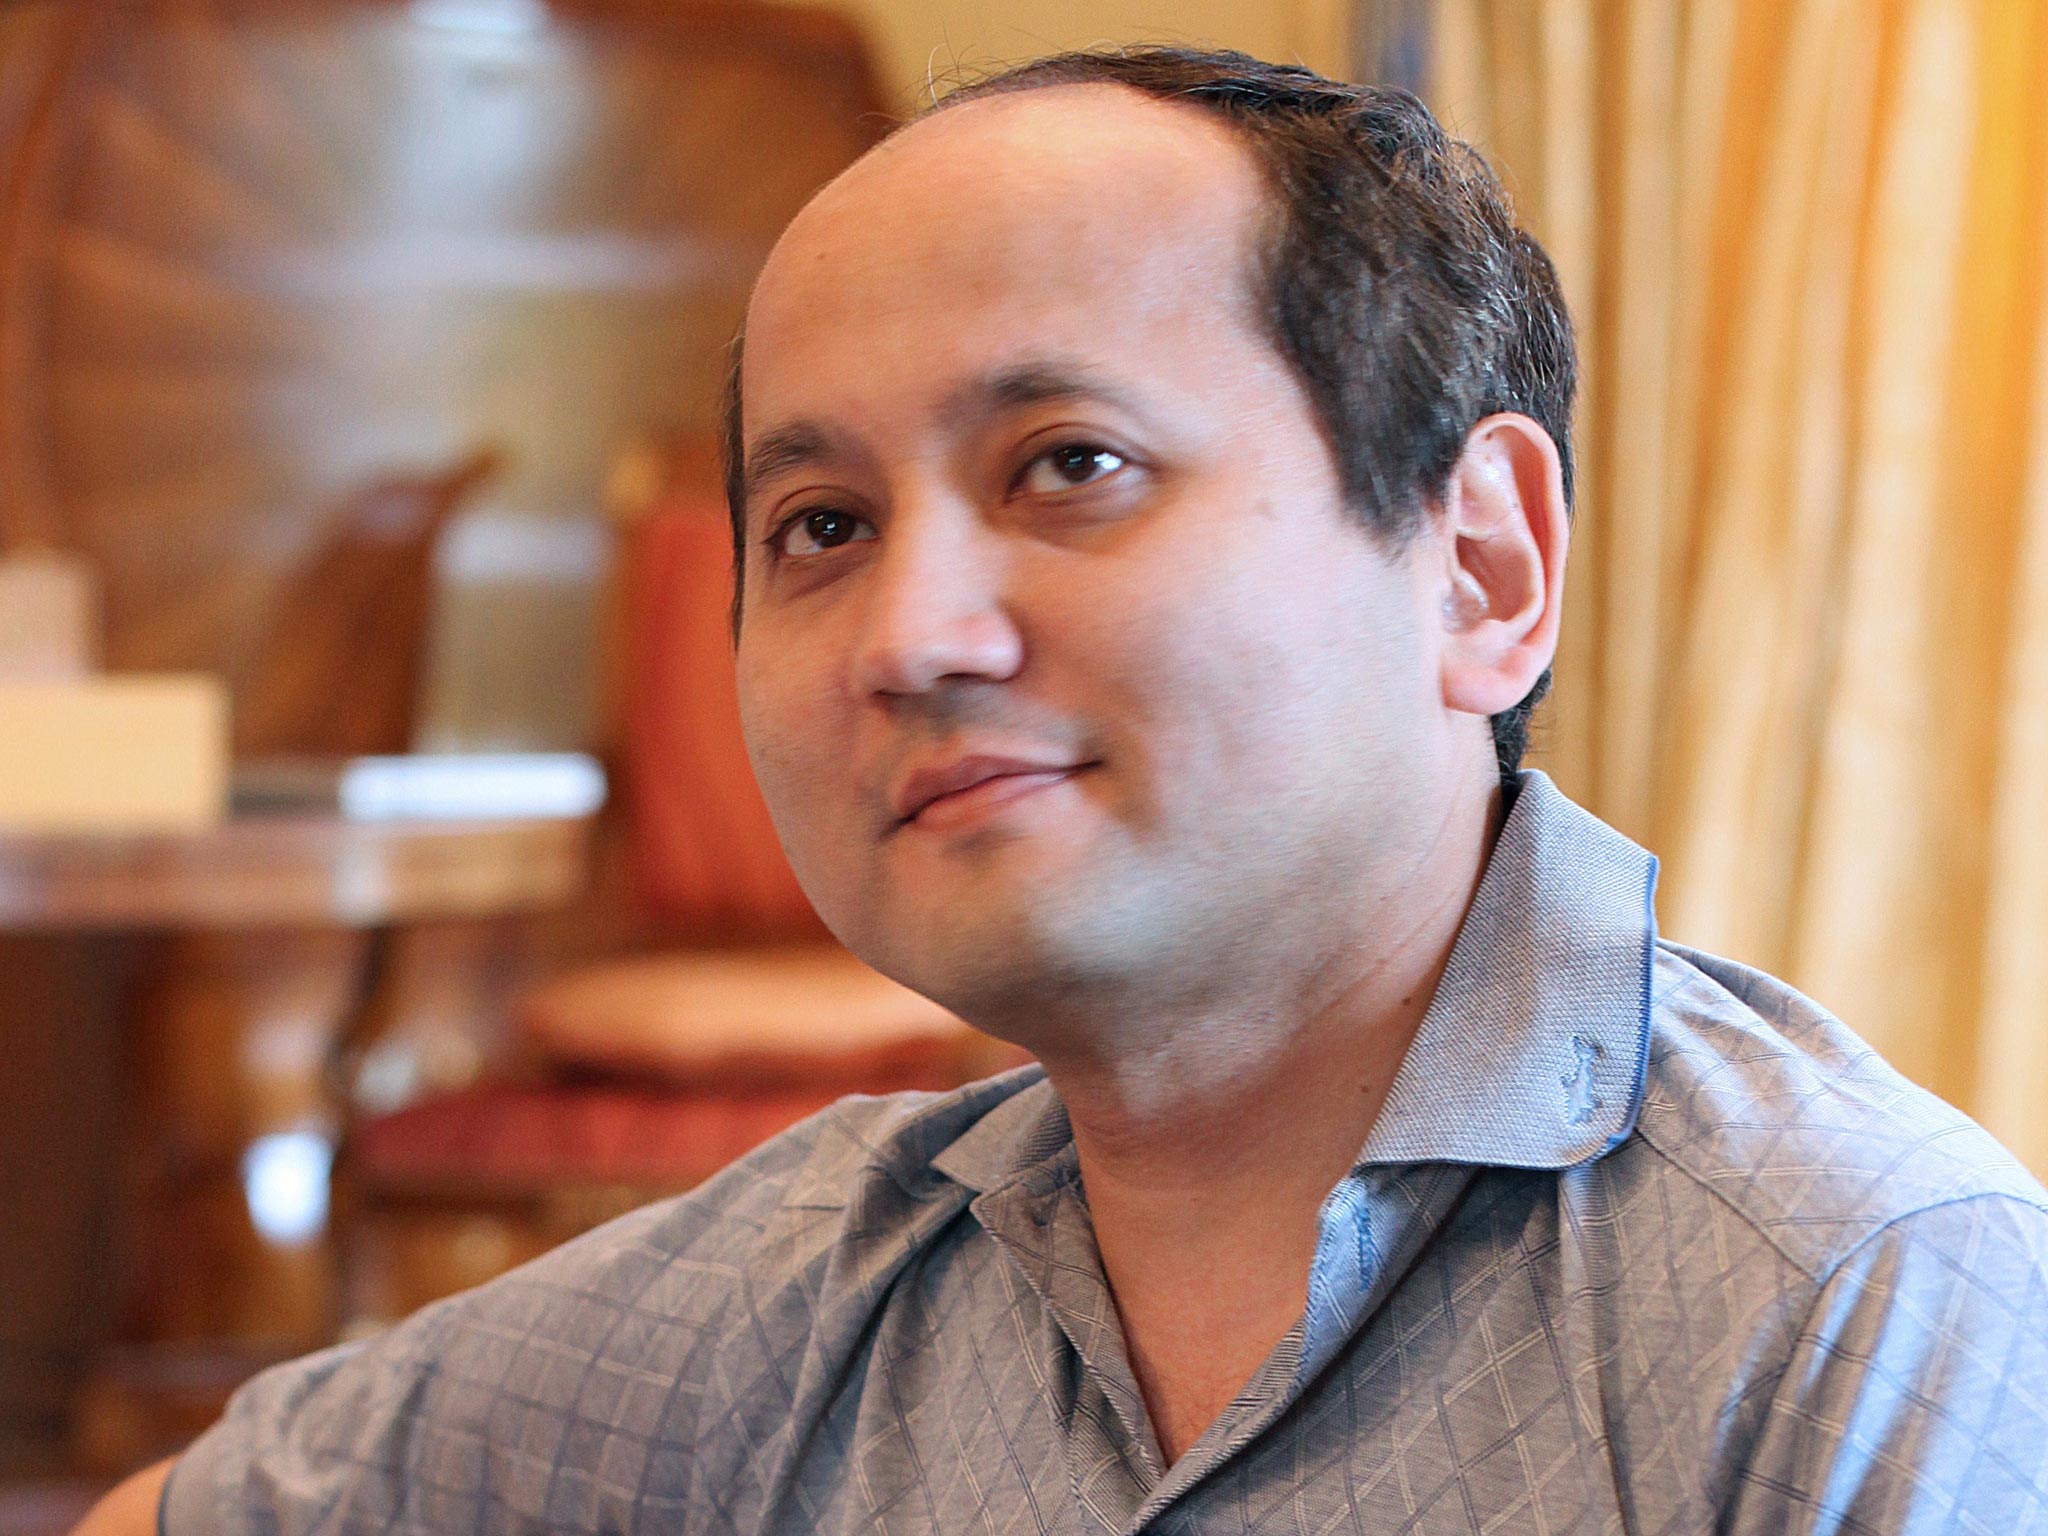 The Kazakh regime has accused Mukhtar Ablyazov of money-laundering and fraud and has demanded his extradition